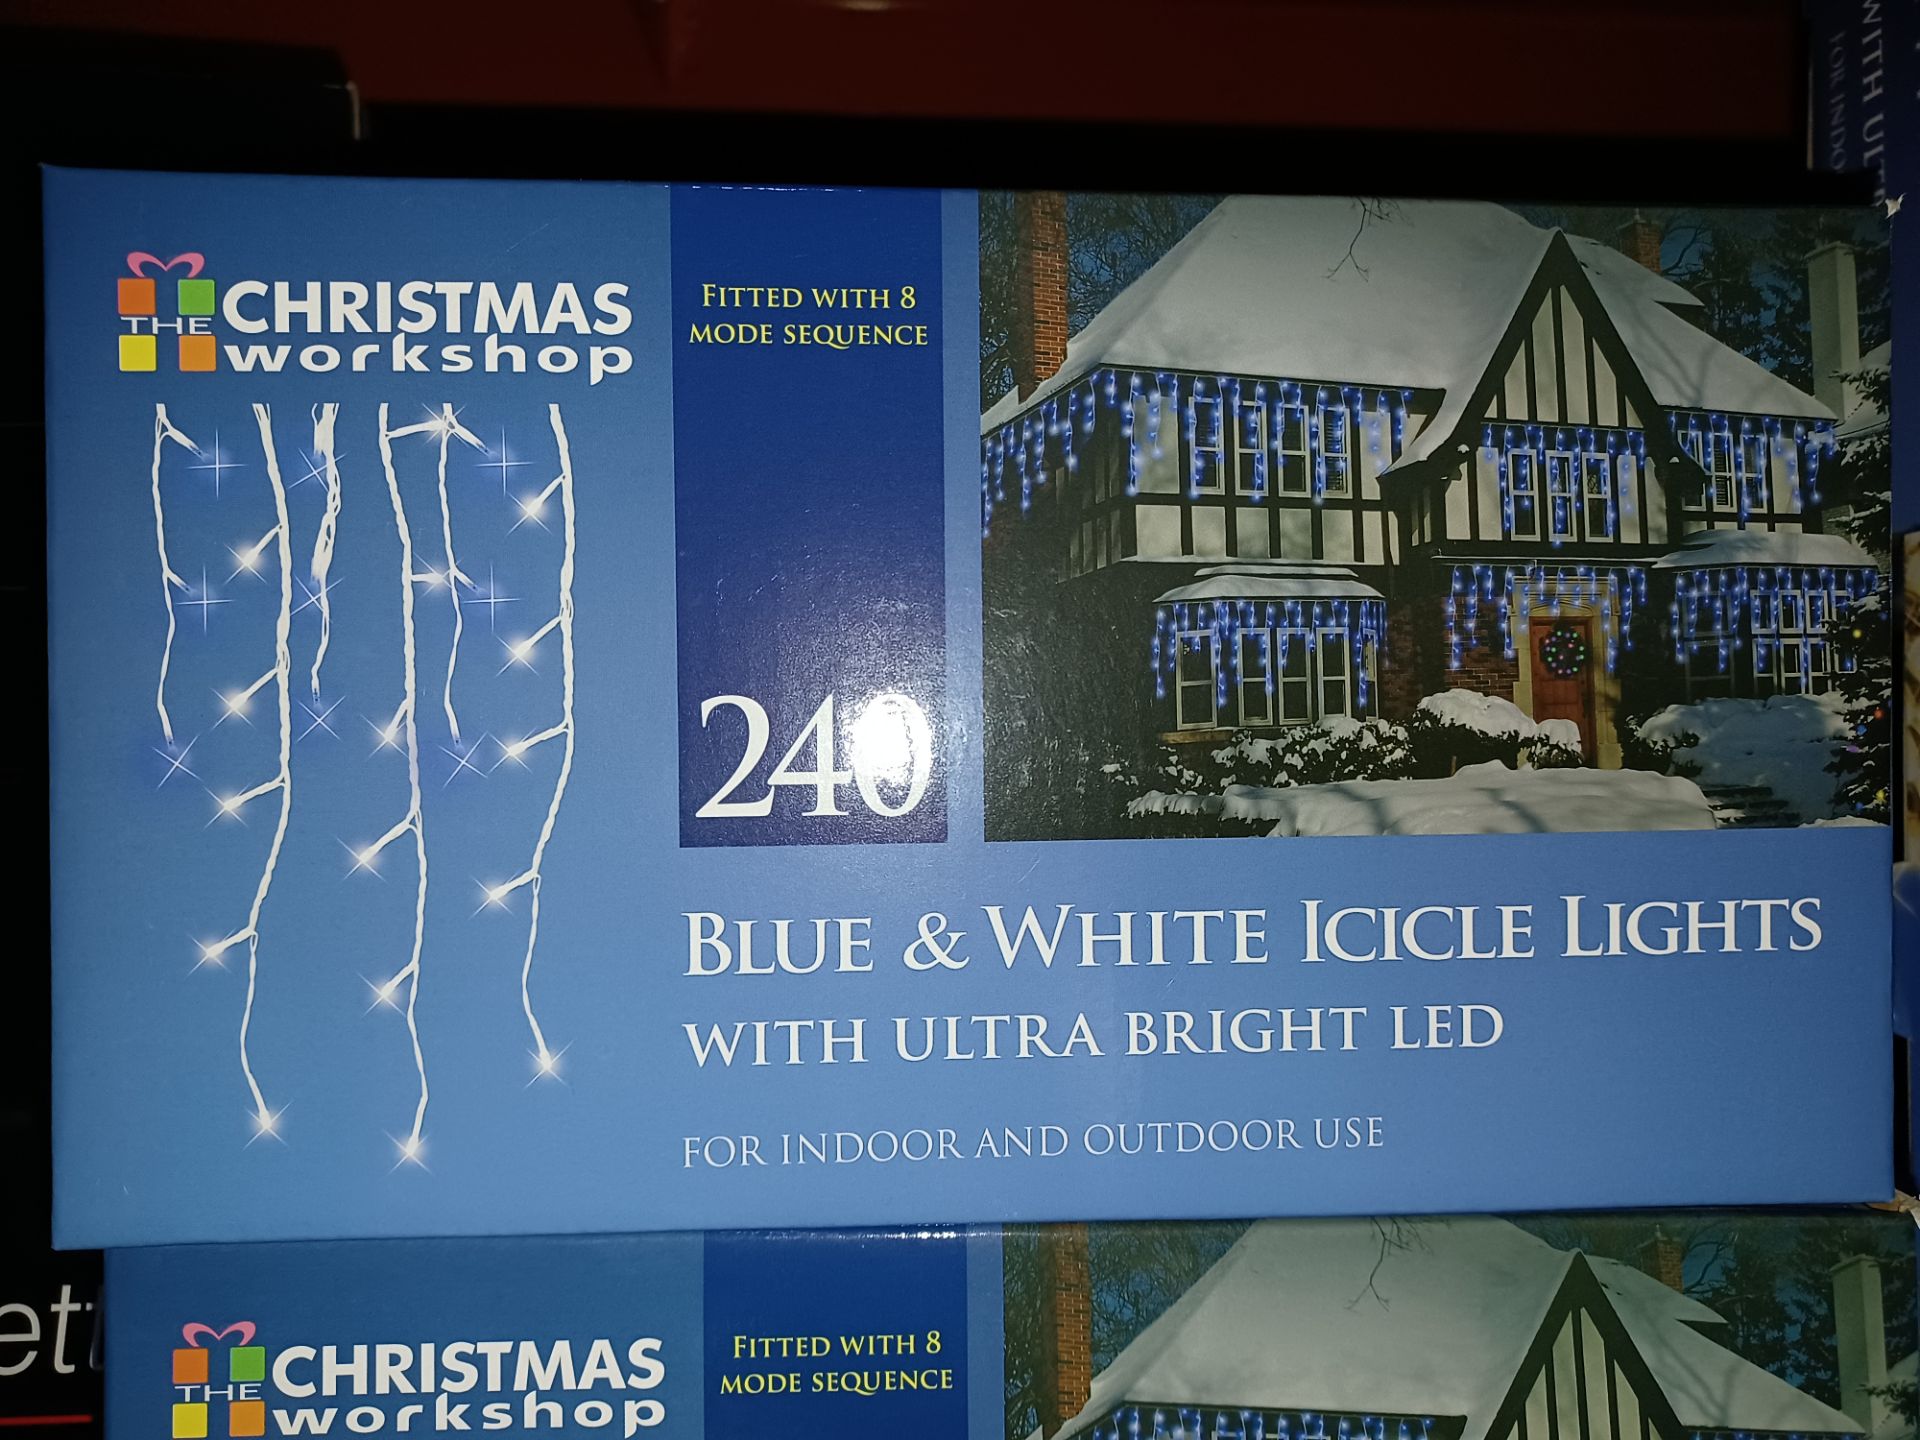 NEW BOXED 6 X BLUE & WHITE ICICLE LIGHTS WITH ULTRA BRIGHT LED 22.9M LIGHT LENGTH 8 COMBO LIGHT